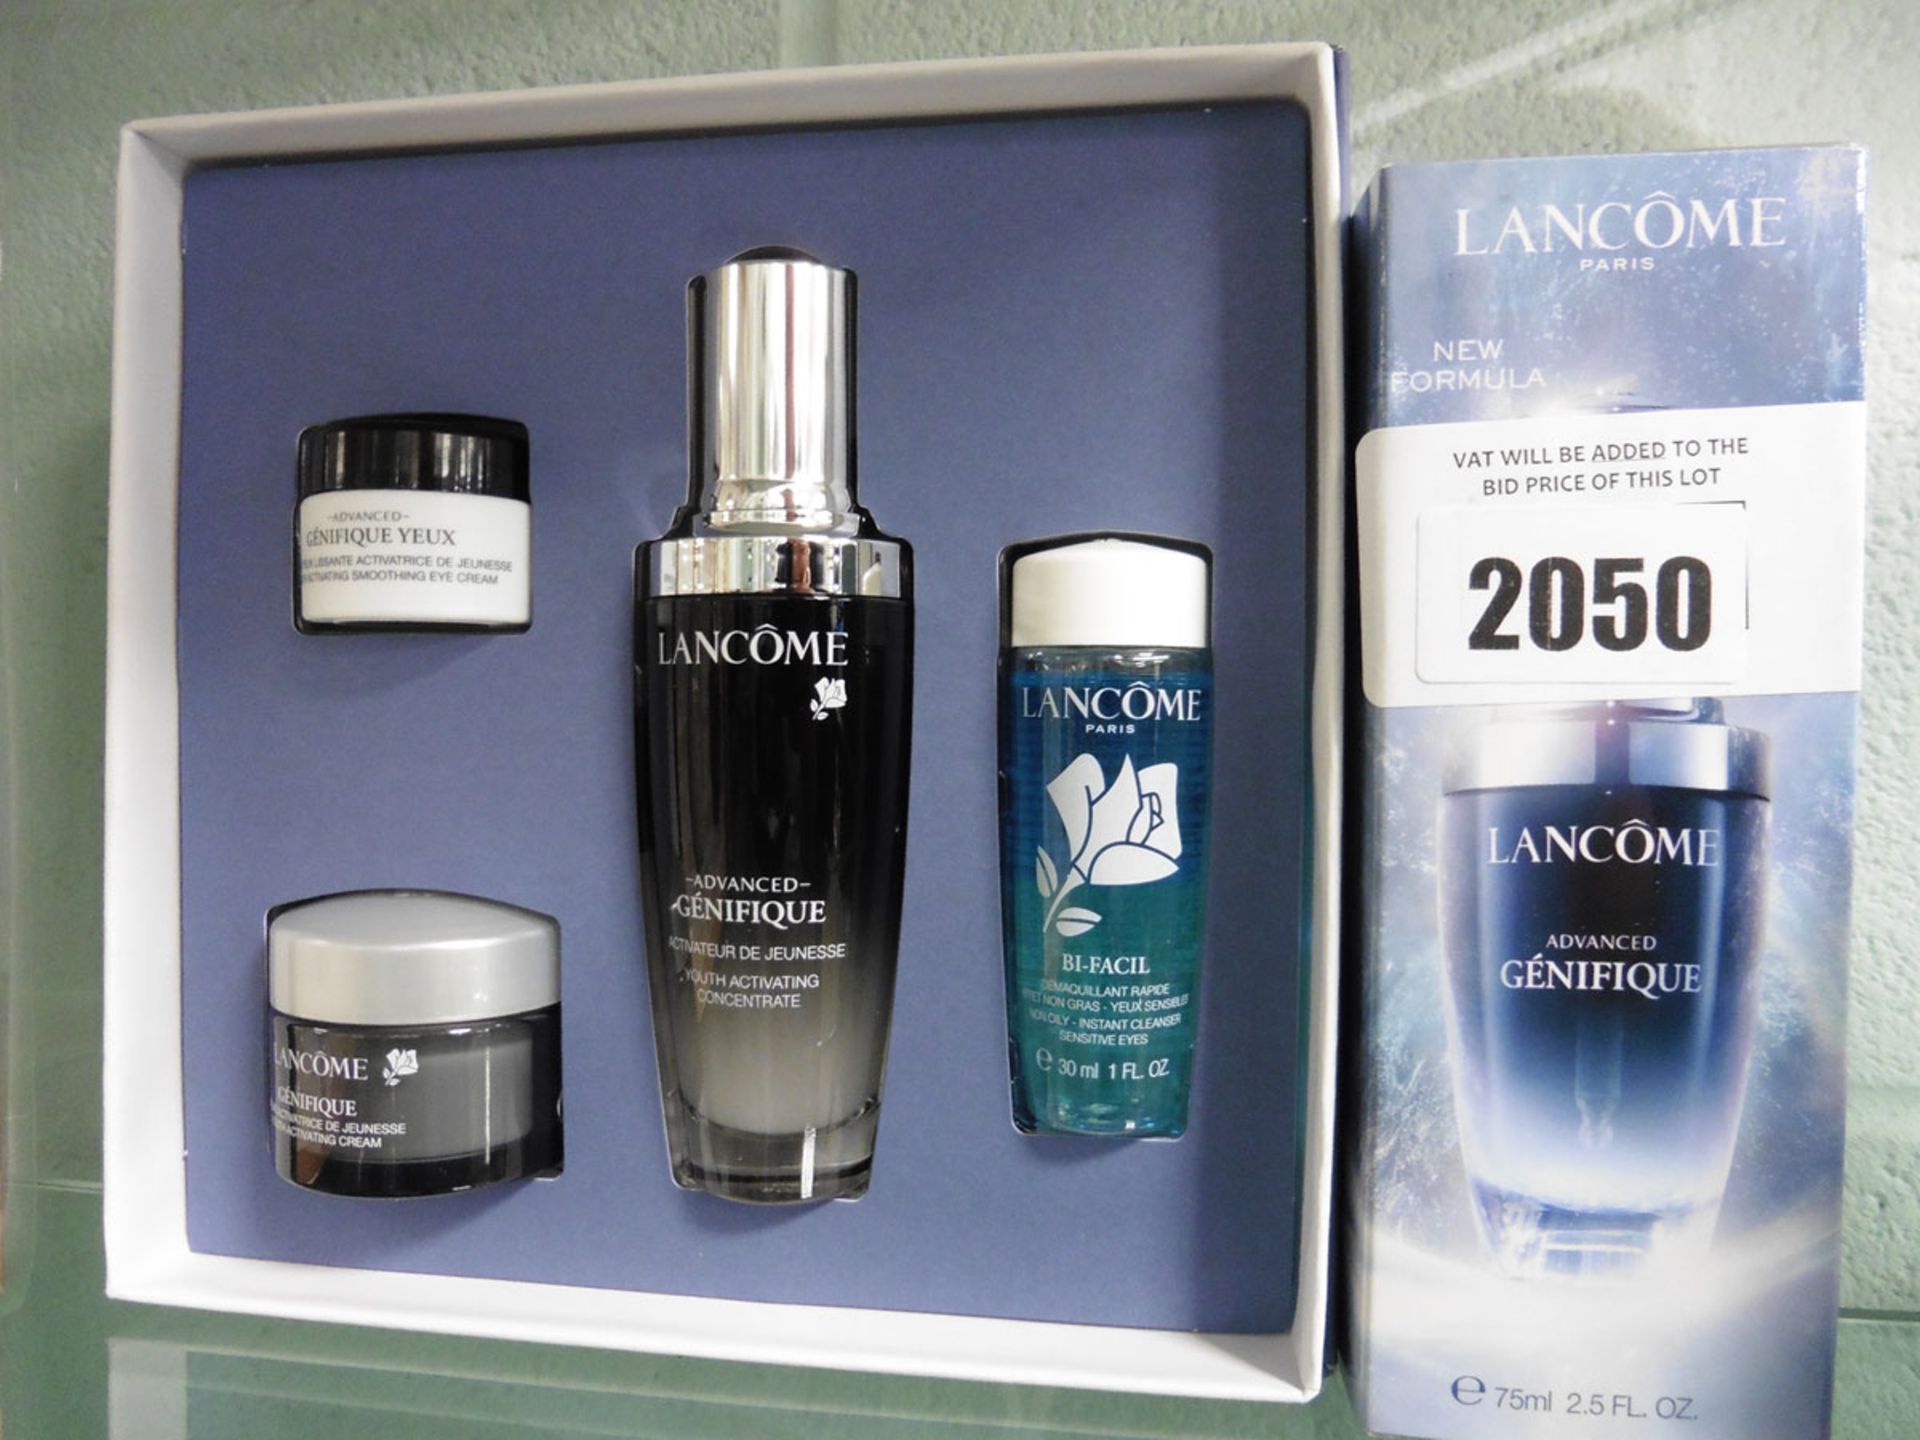 Lancome set of cosmetics to include creams, cleansers etc.